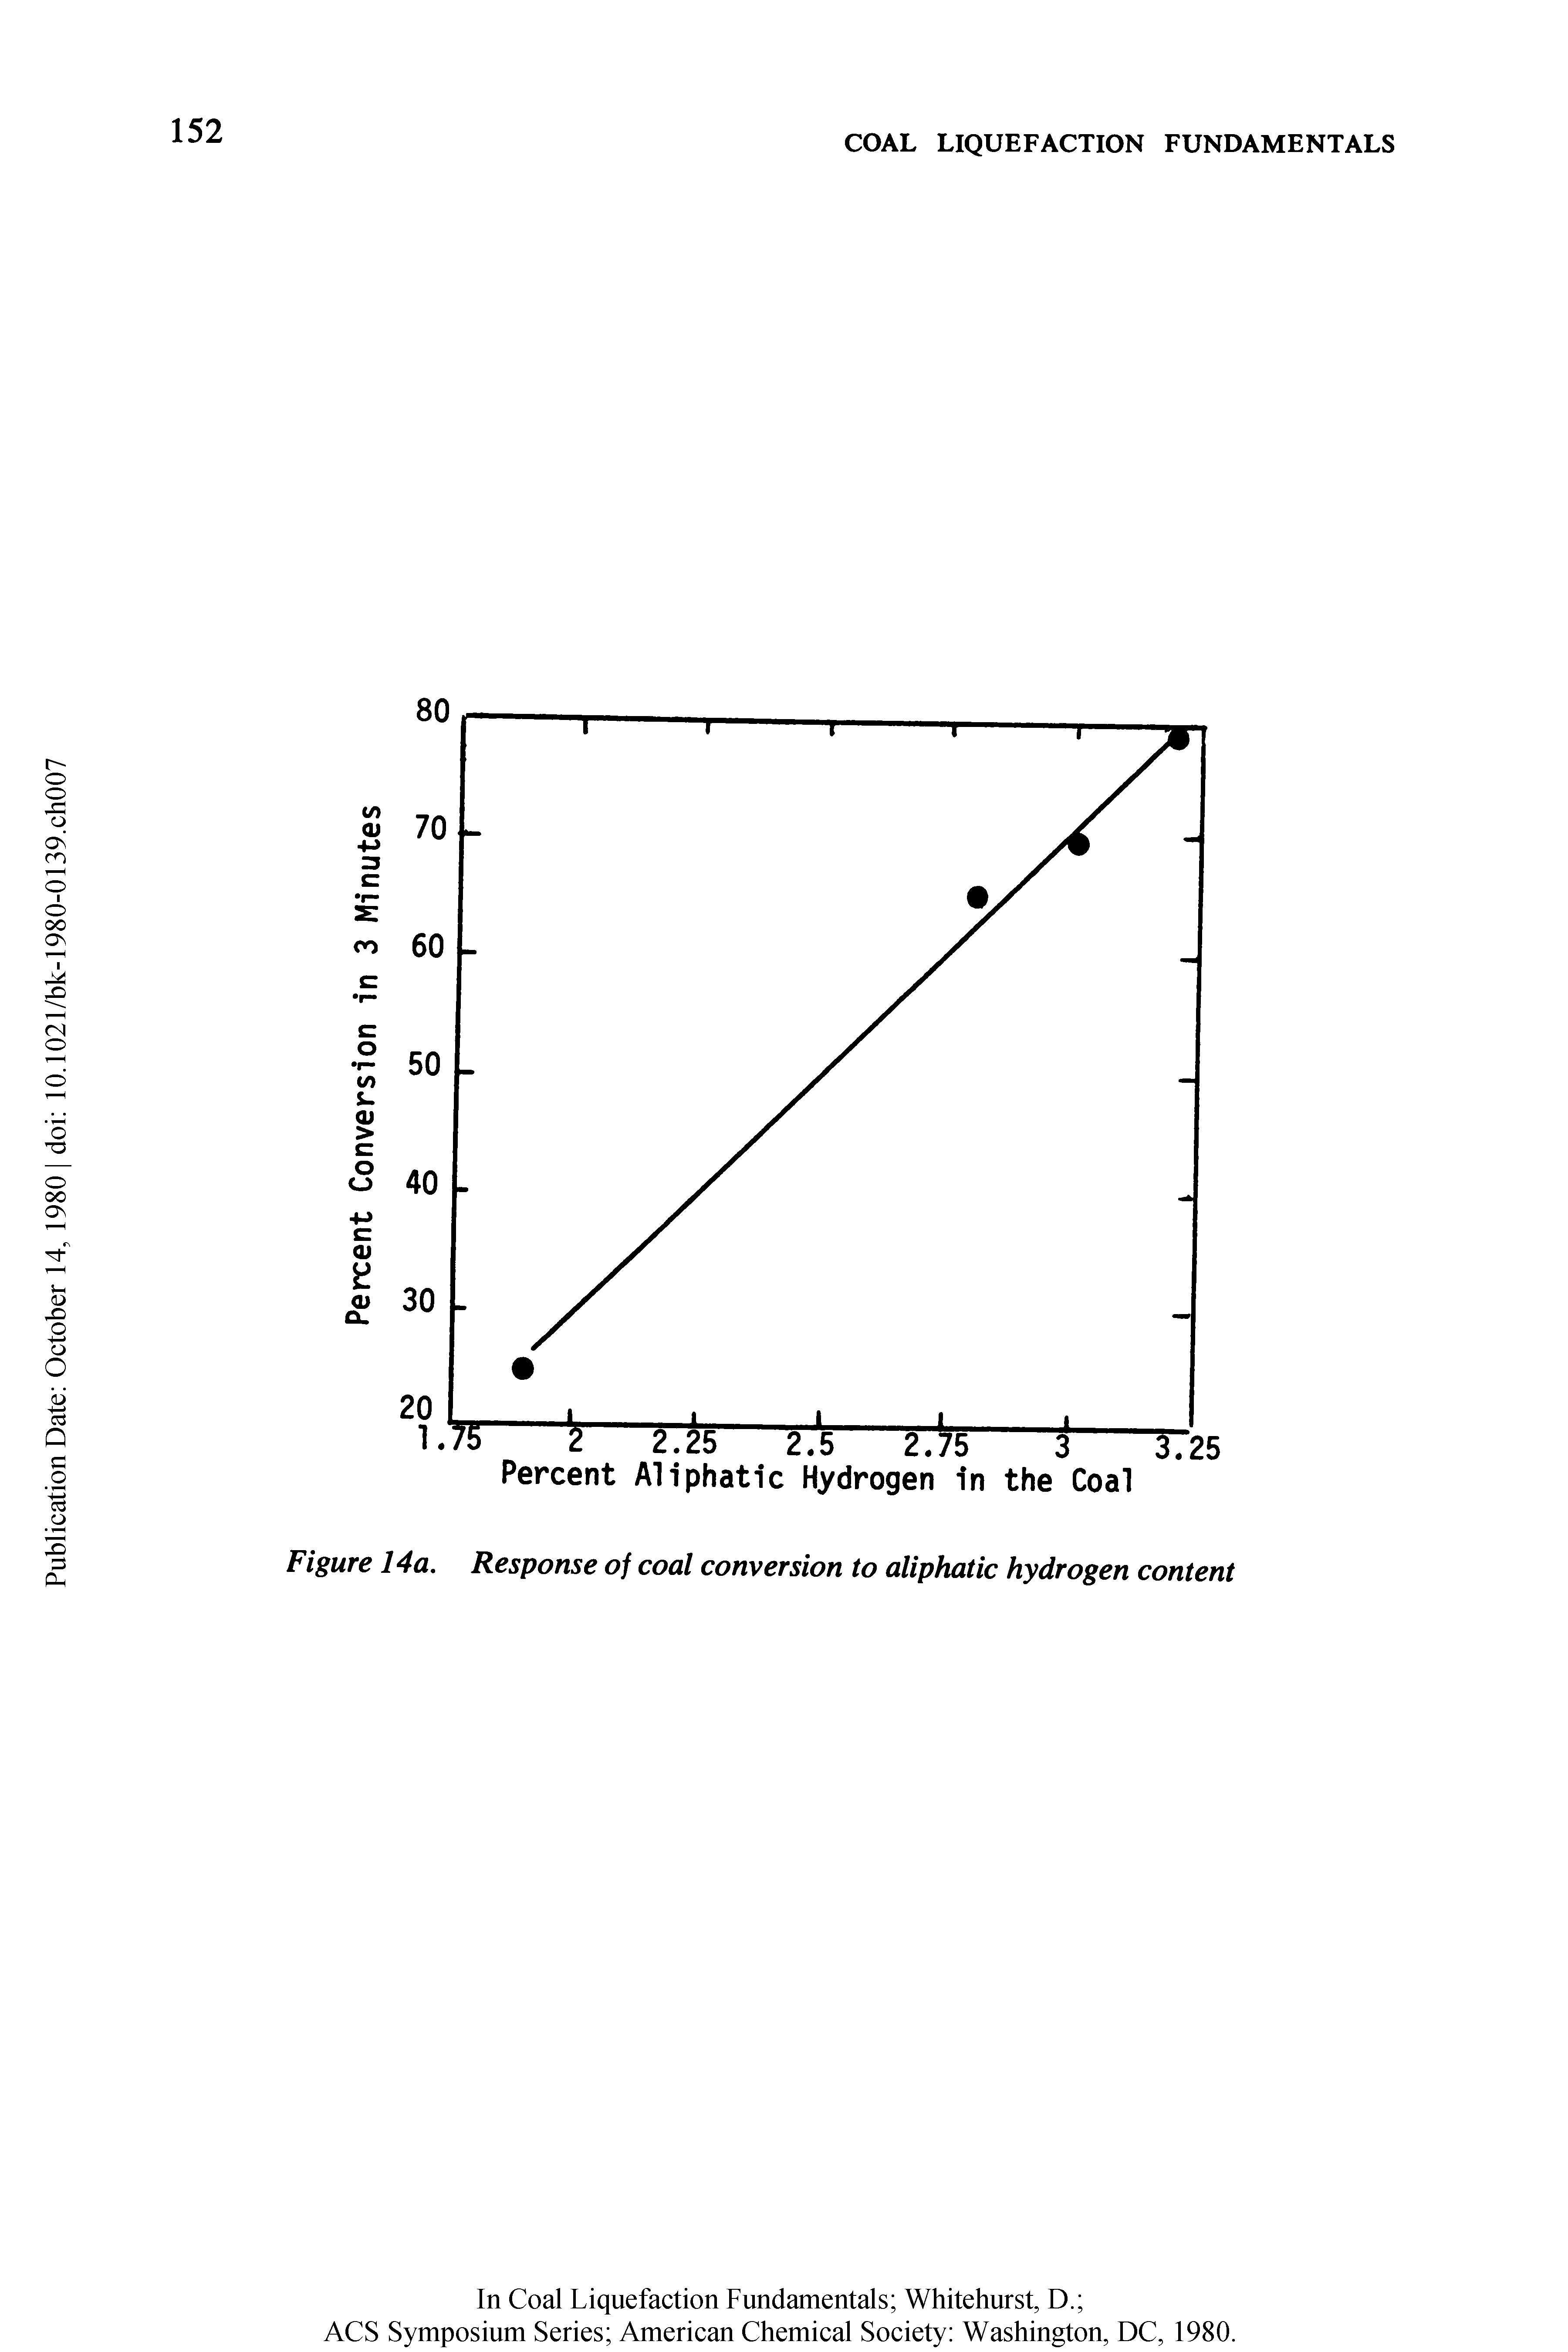 Figure 14a. Response of coal conversion to aliphatic hydrogen content...